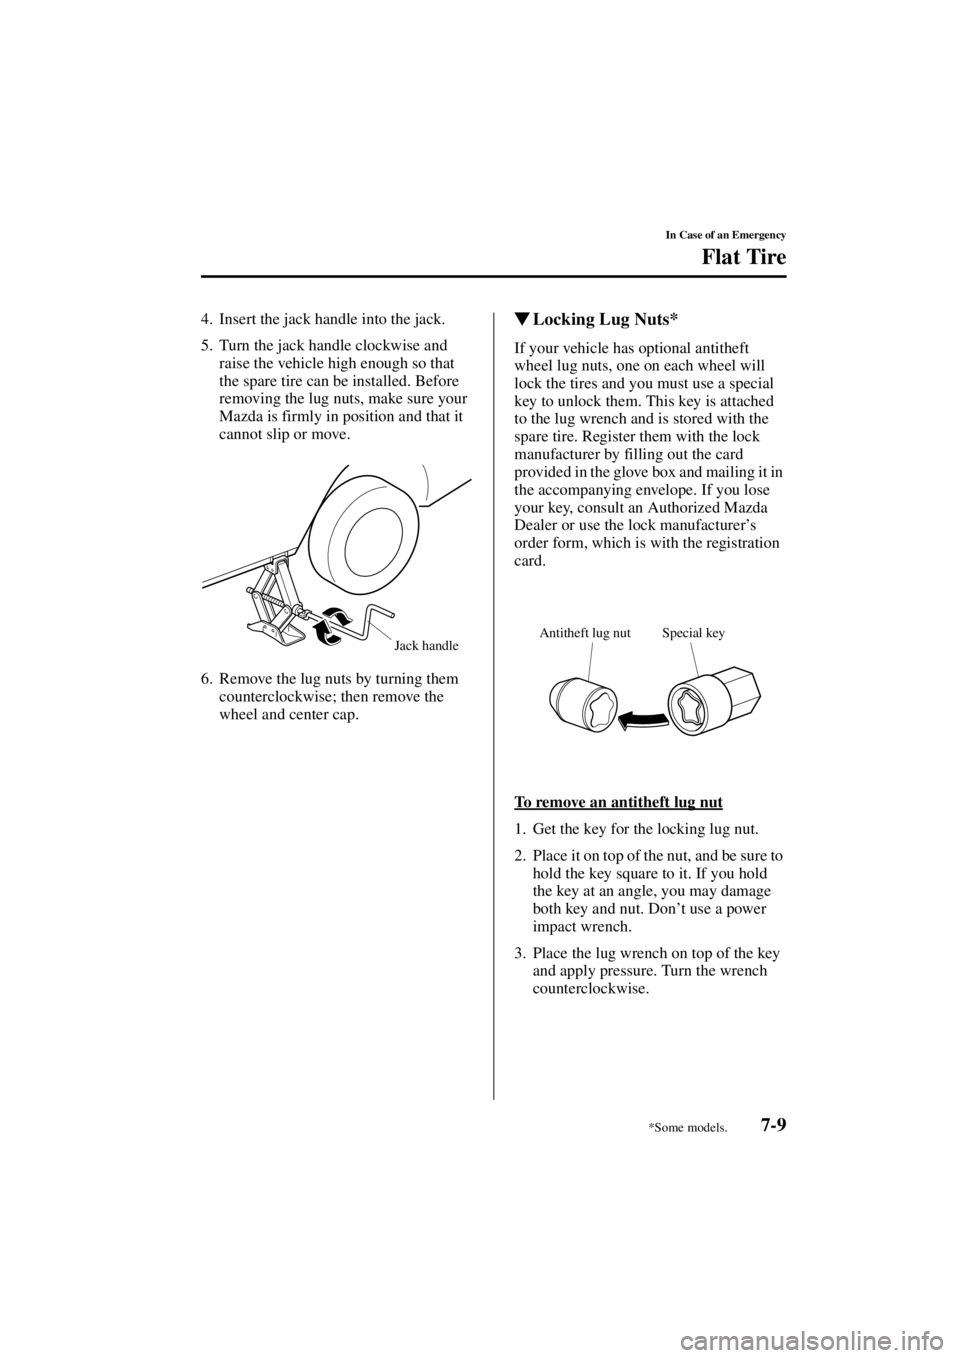 MAZDA MODEL 3 4-DOOR 2004  Owners Manual 7-9
In Case of an Emergency
Flat Tire
Form No. 8S18-EA-03I
4. Insert the jack handle into the jack.
5. Turn the jack handle clockwise and raise the vehicle high enough so that 
the spare tire can be i